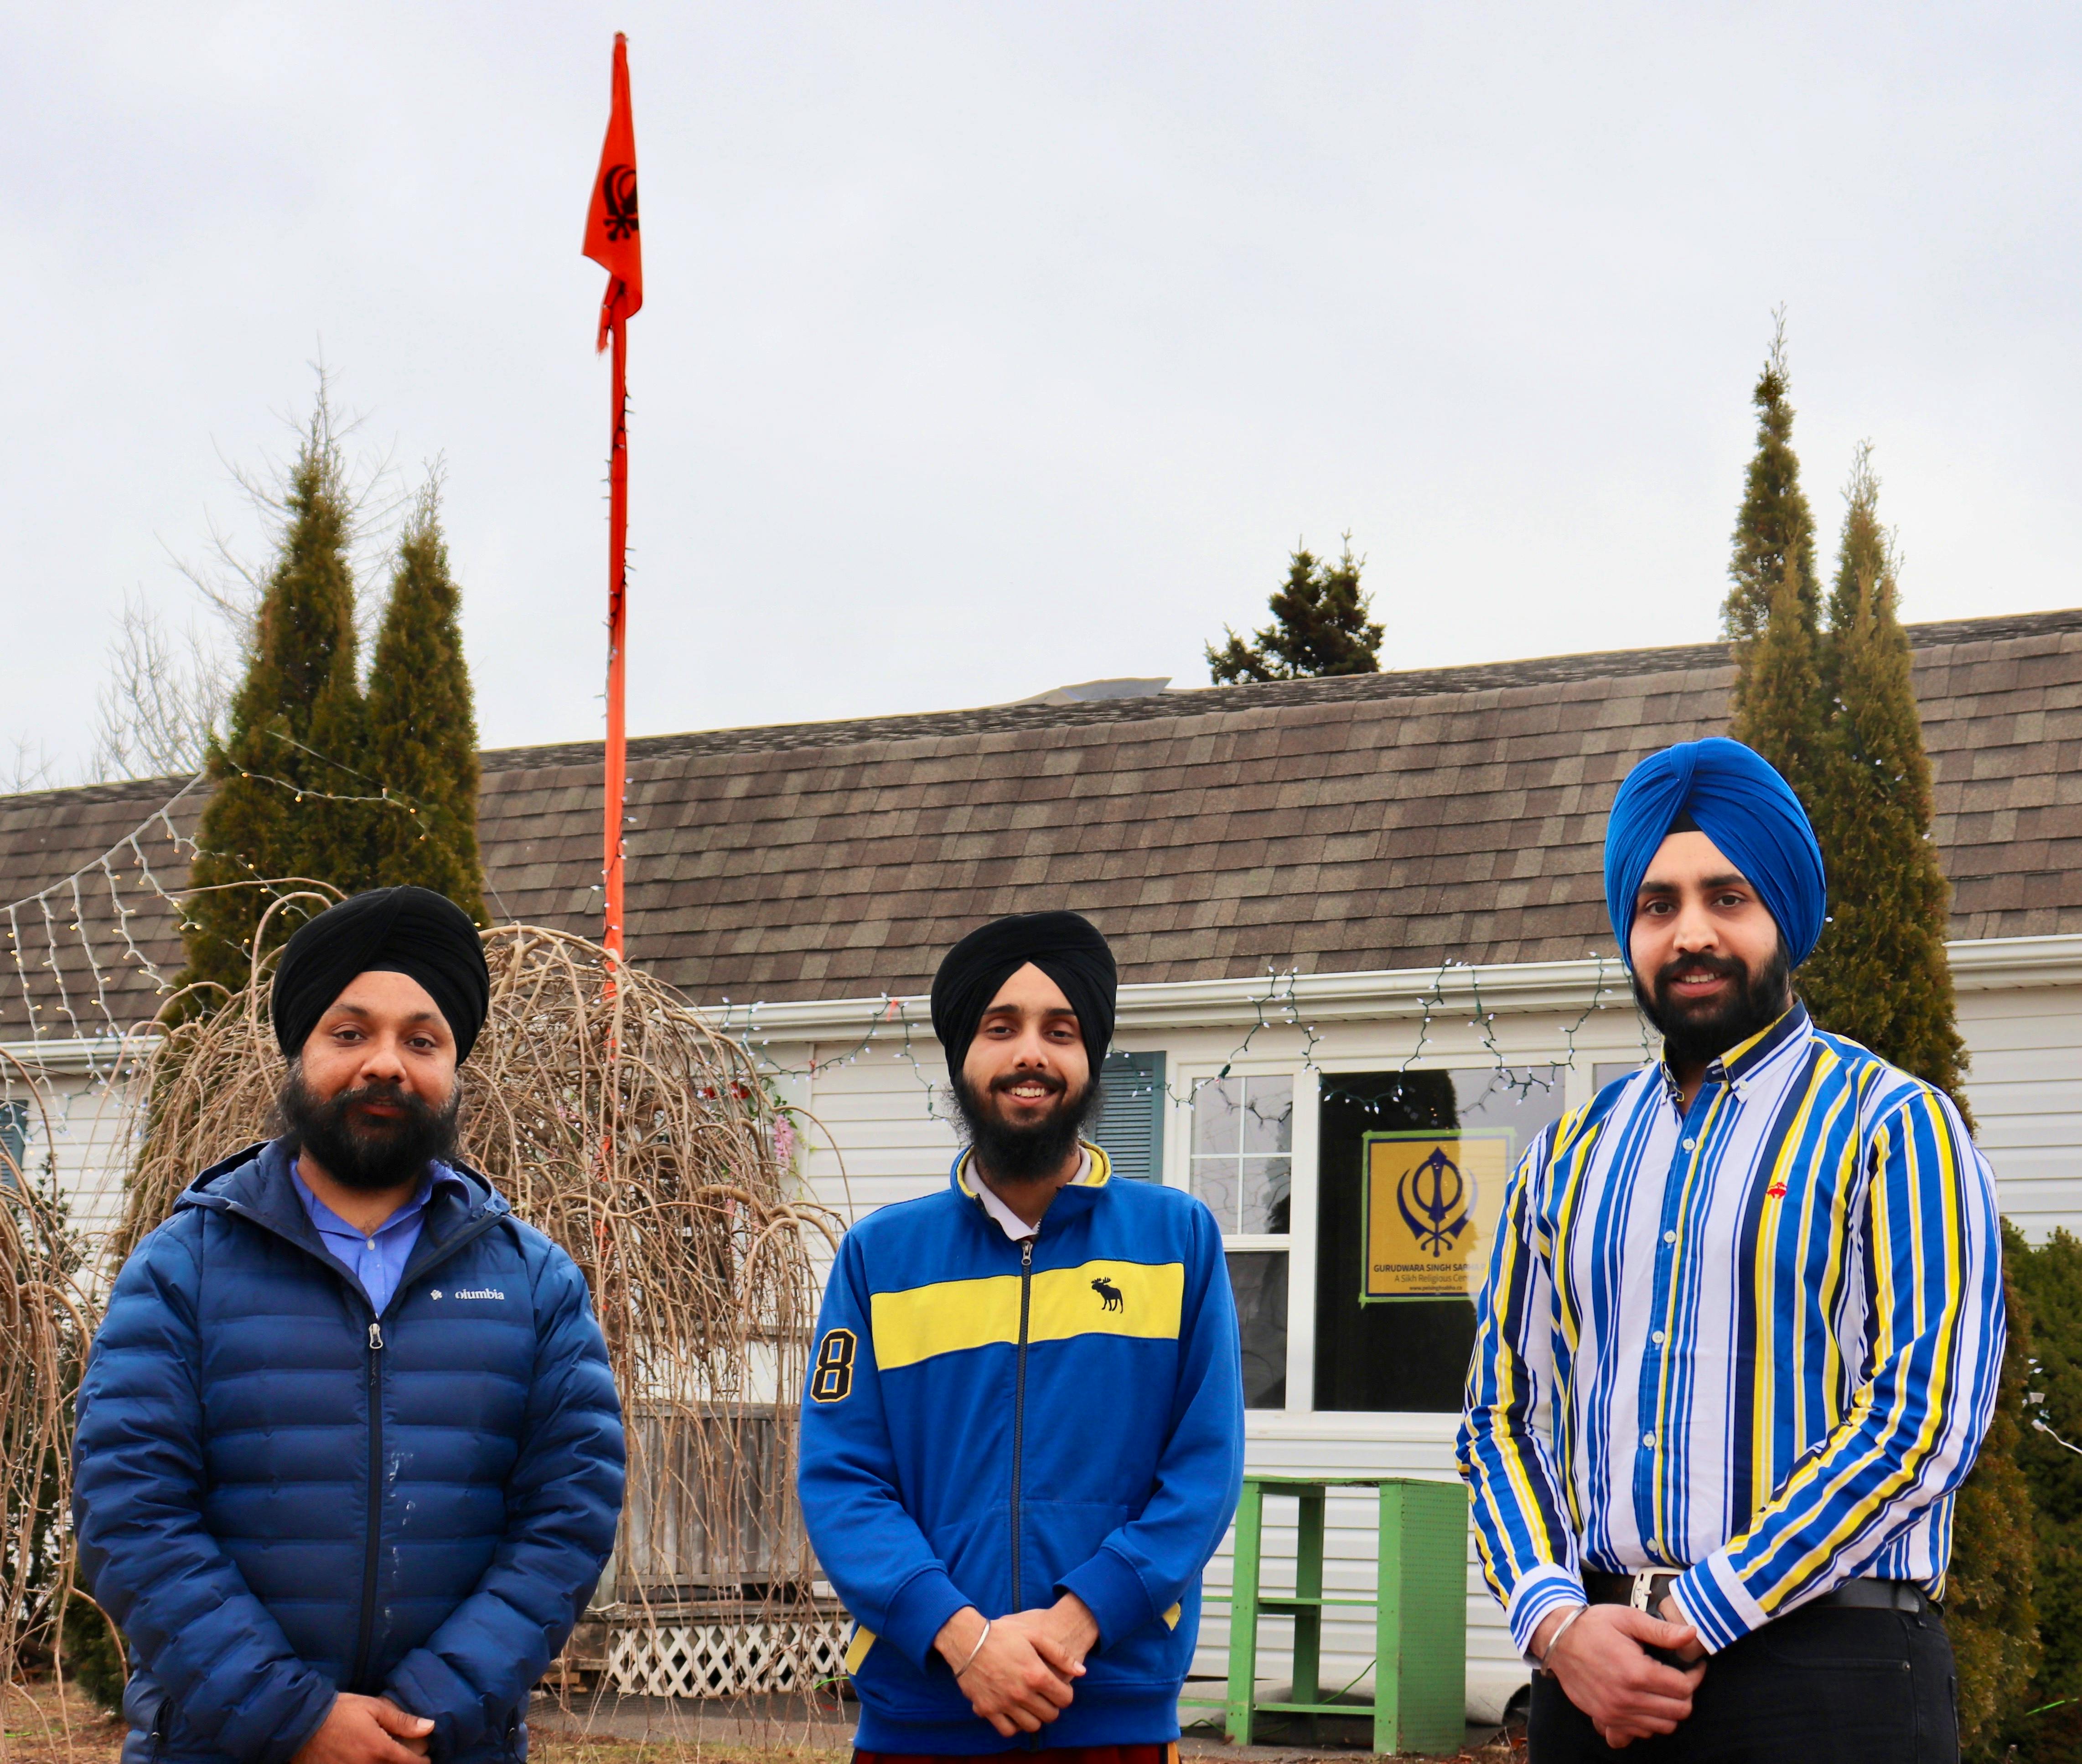 Prabhjot Singh, right, says gurudwaras across the world fly an orange flag (visibile in the background) called nishan sahib, which notifies people of a gurudwara in the neighborhood where they can eat and find shelter. Arshgod Singh stands in the middle with Savneet Singh on his left, outside the Gurudwara Sahib in Stratford.